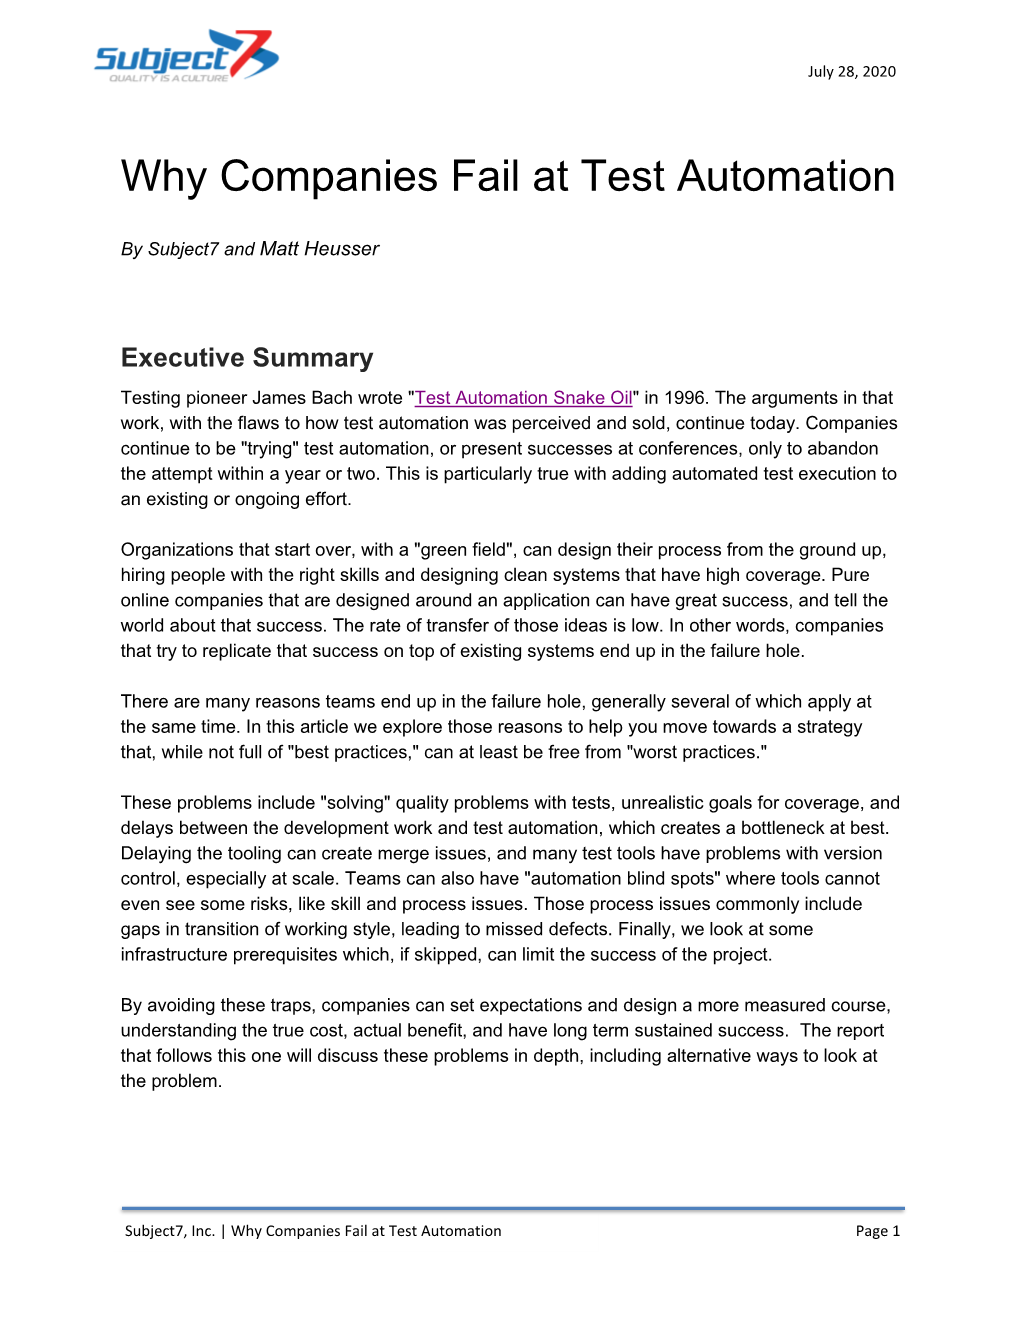 Why Companies Fail at Test Automation